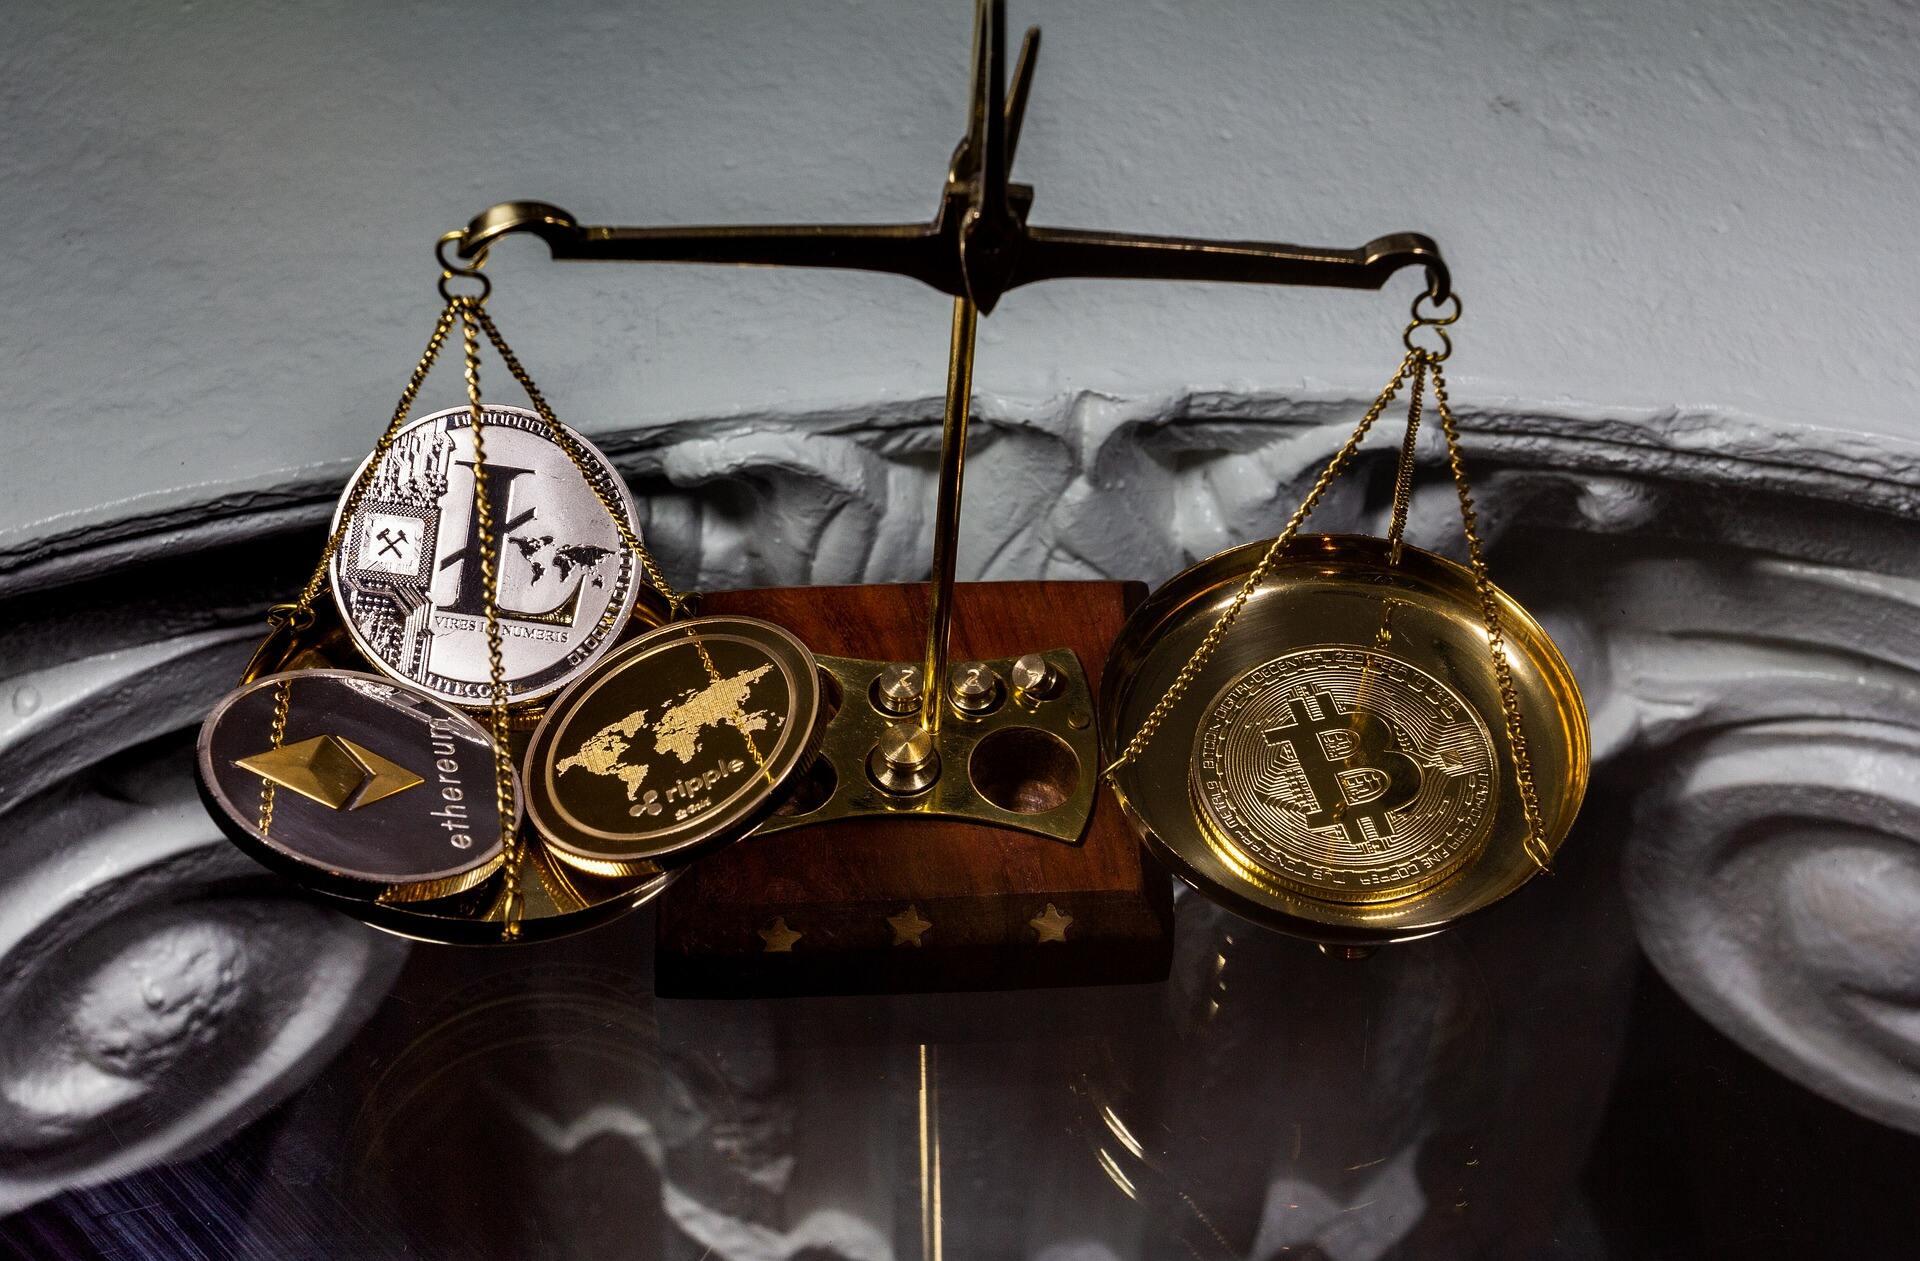 A balance containing many shiny crypto coins with Ethereum, Litecoin, and Ripple on the left with Bitcoin by itself on the right.